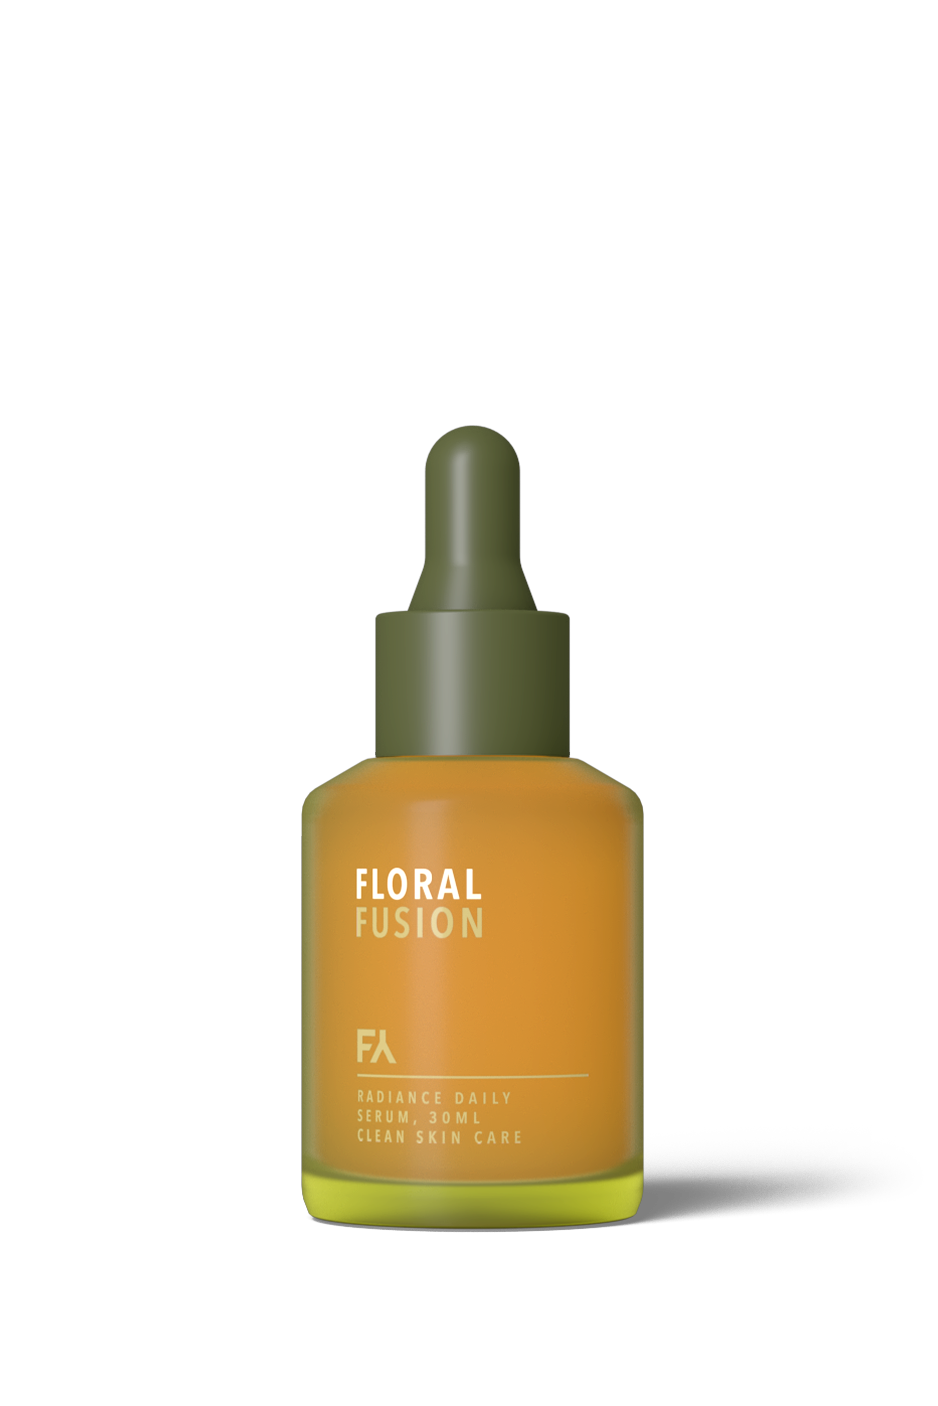 Product image of the Floral Fusion Radiance Daily Serum by Fields of Yarrow on transparent background